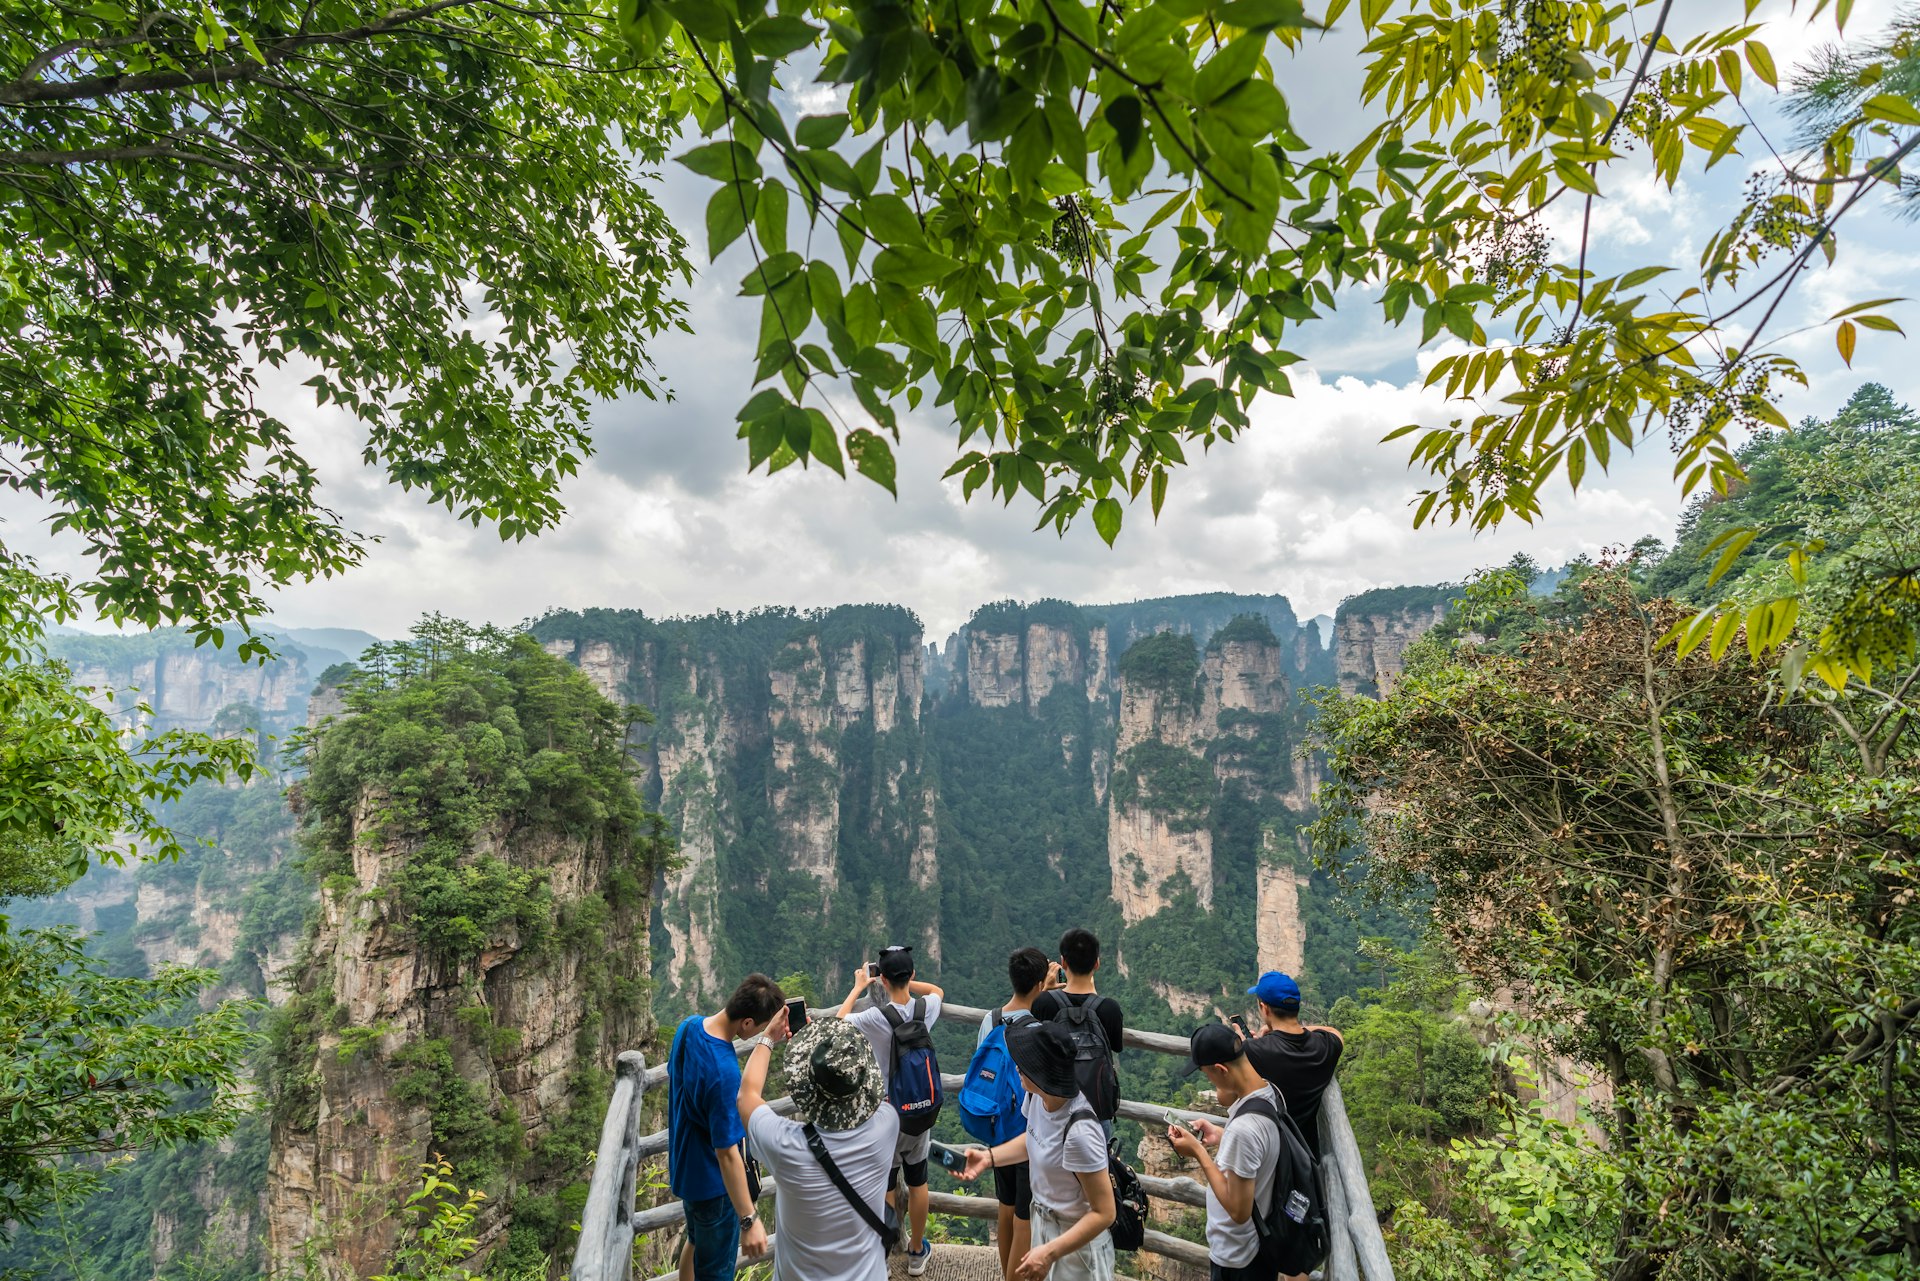 Tourist taking pictures from the viewpoint at Zhangjiajie National Forest Park